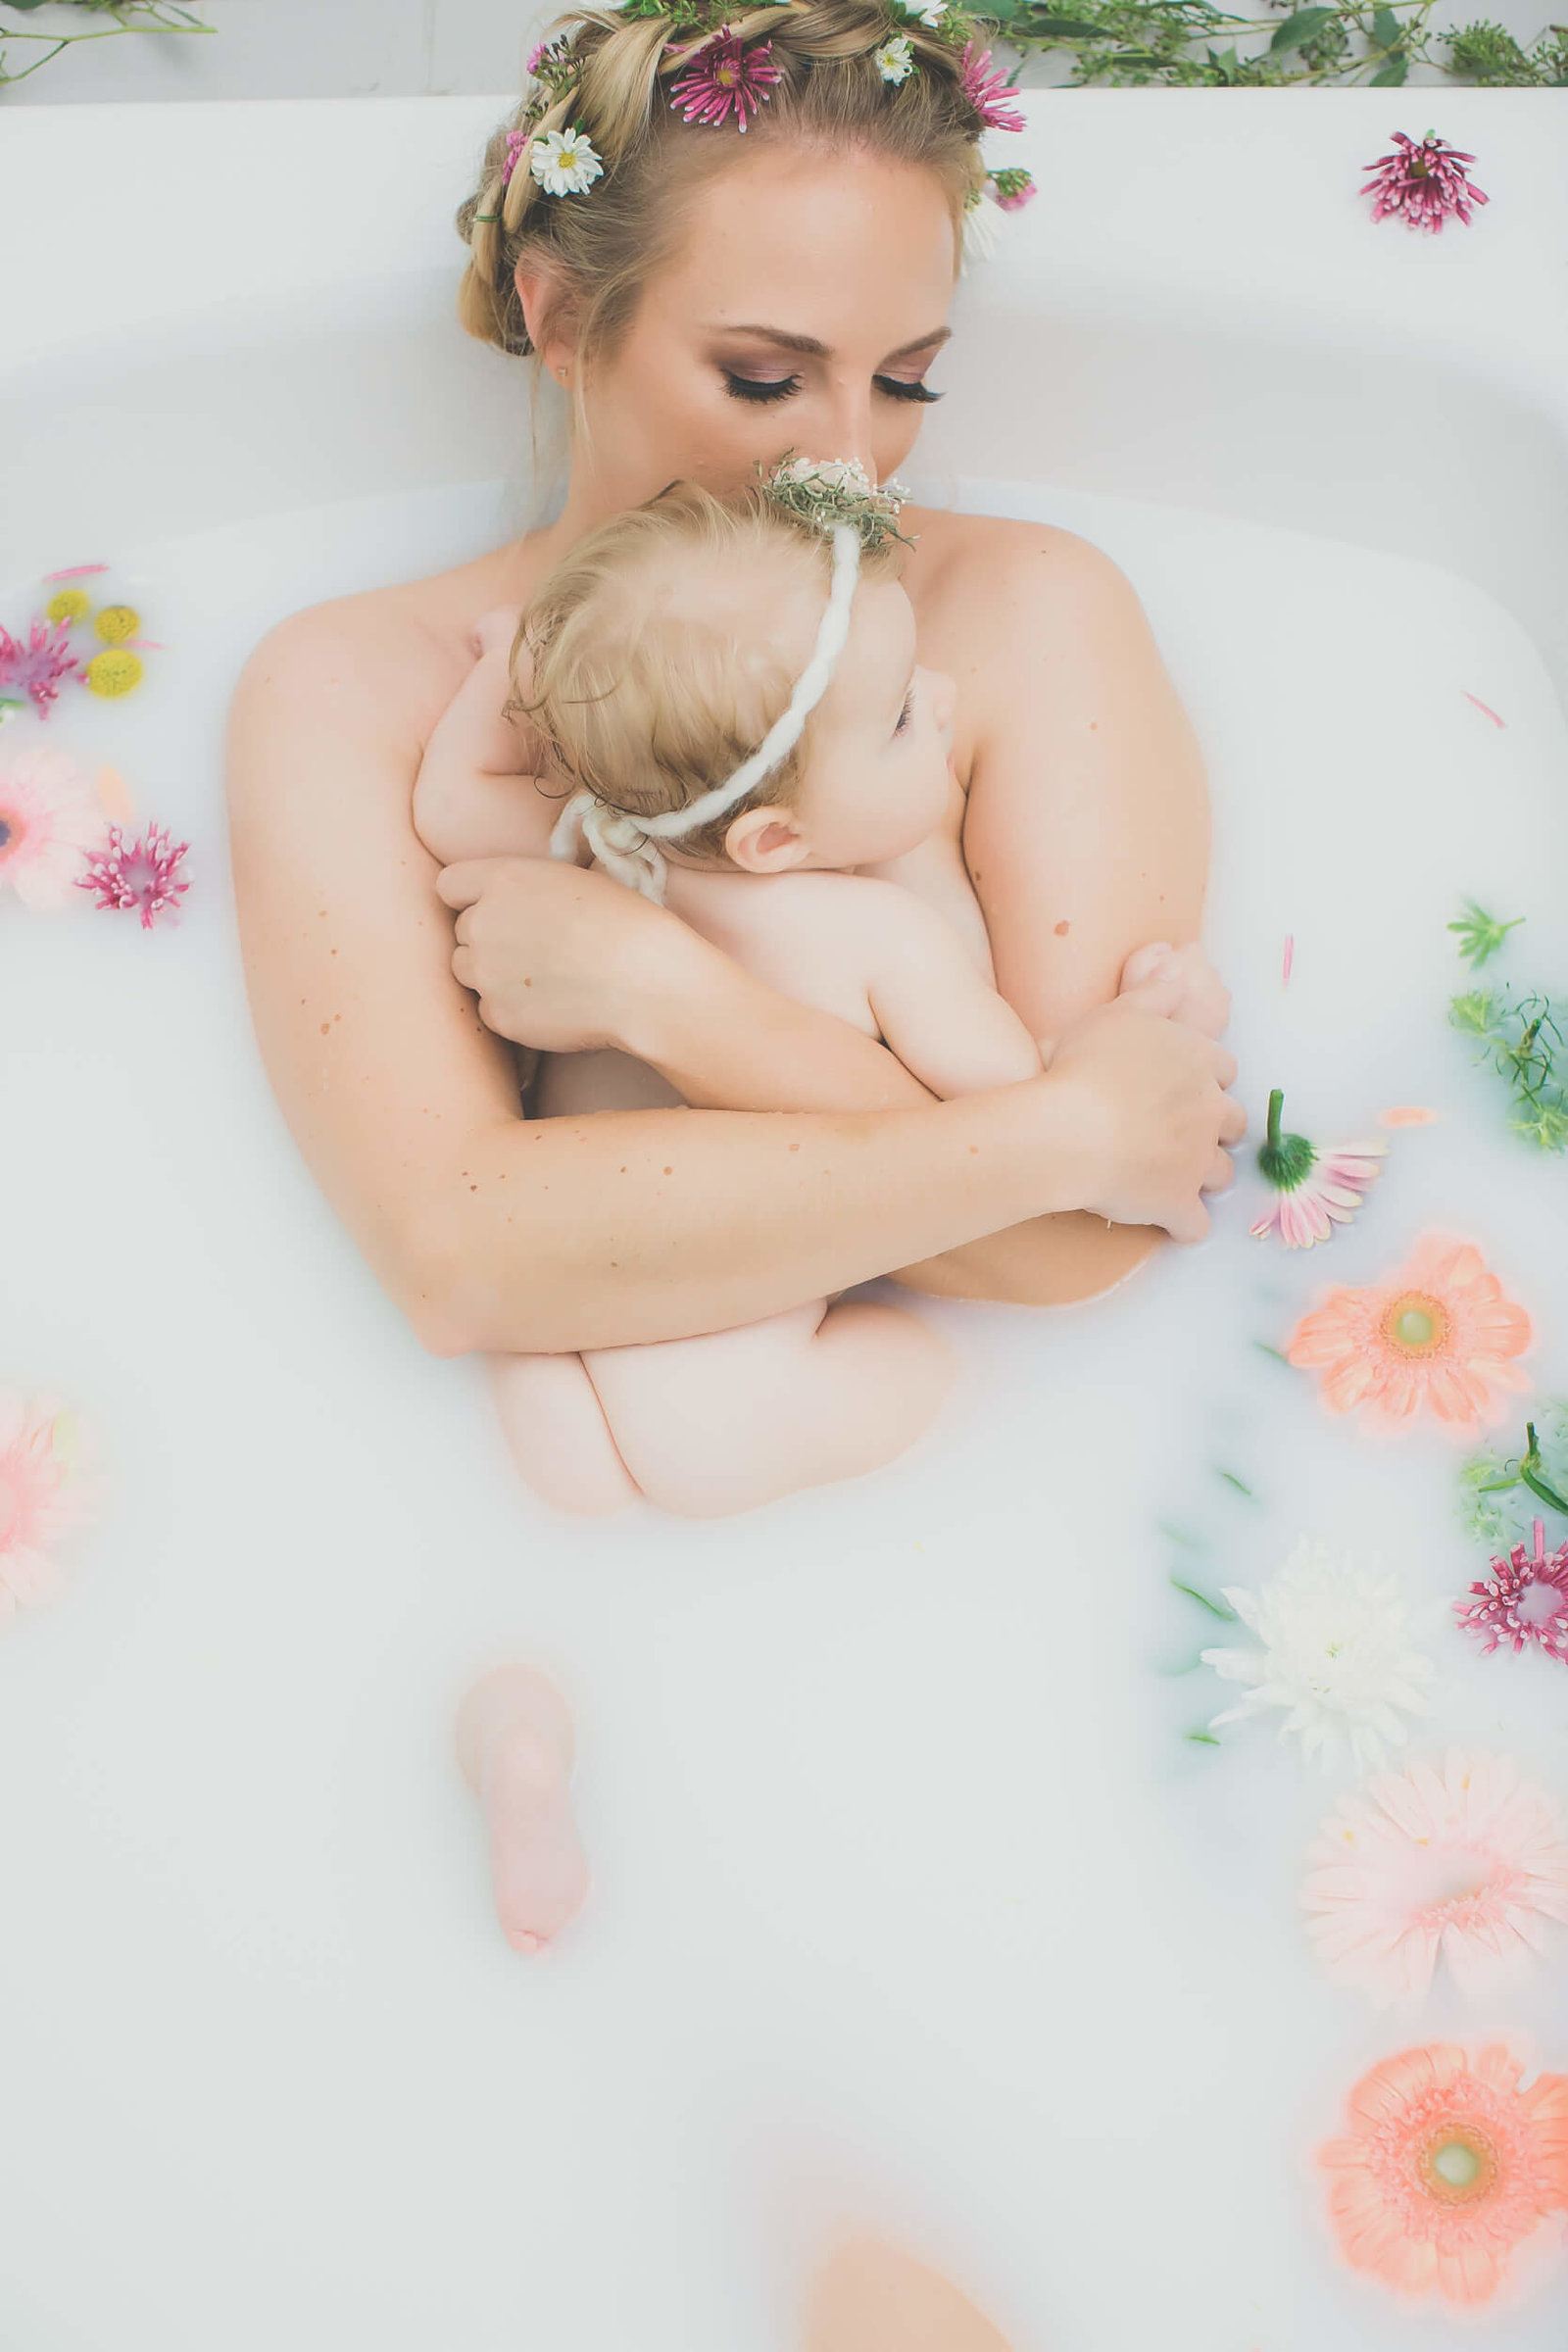 mommy and child milkbath session with flowers